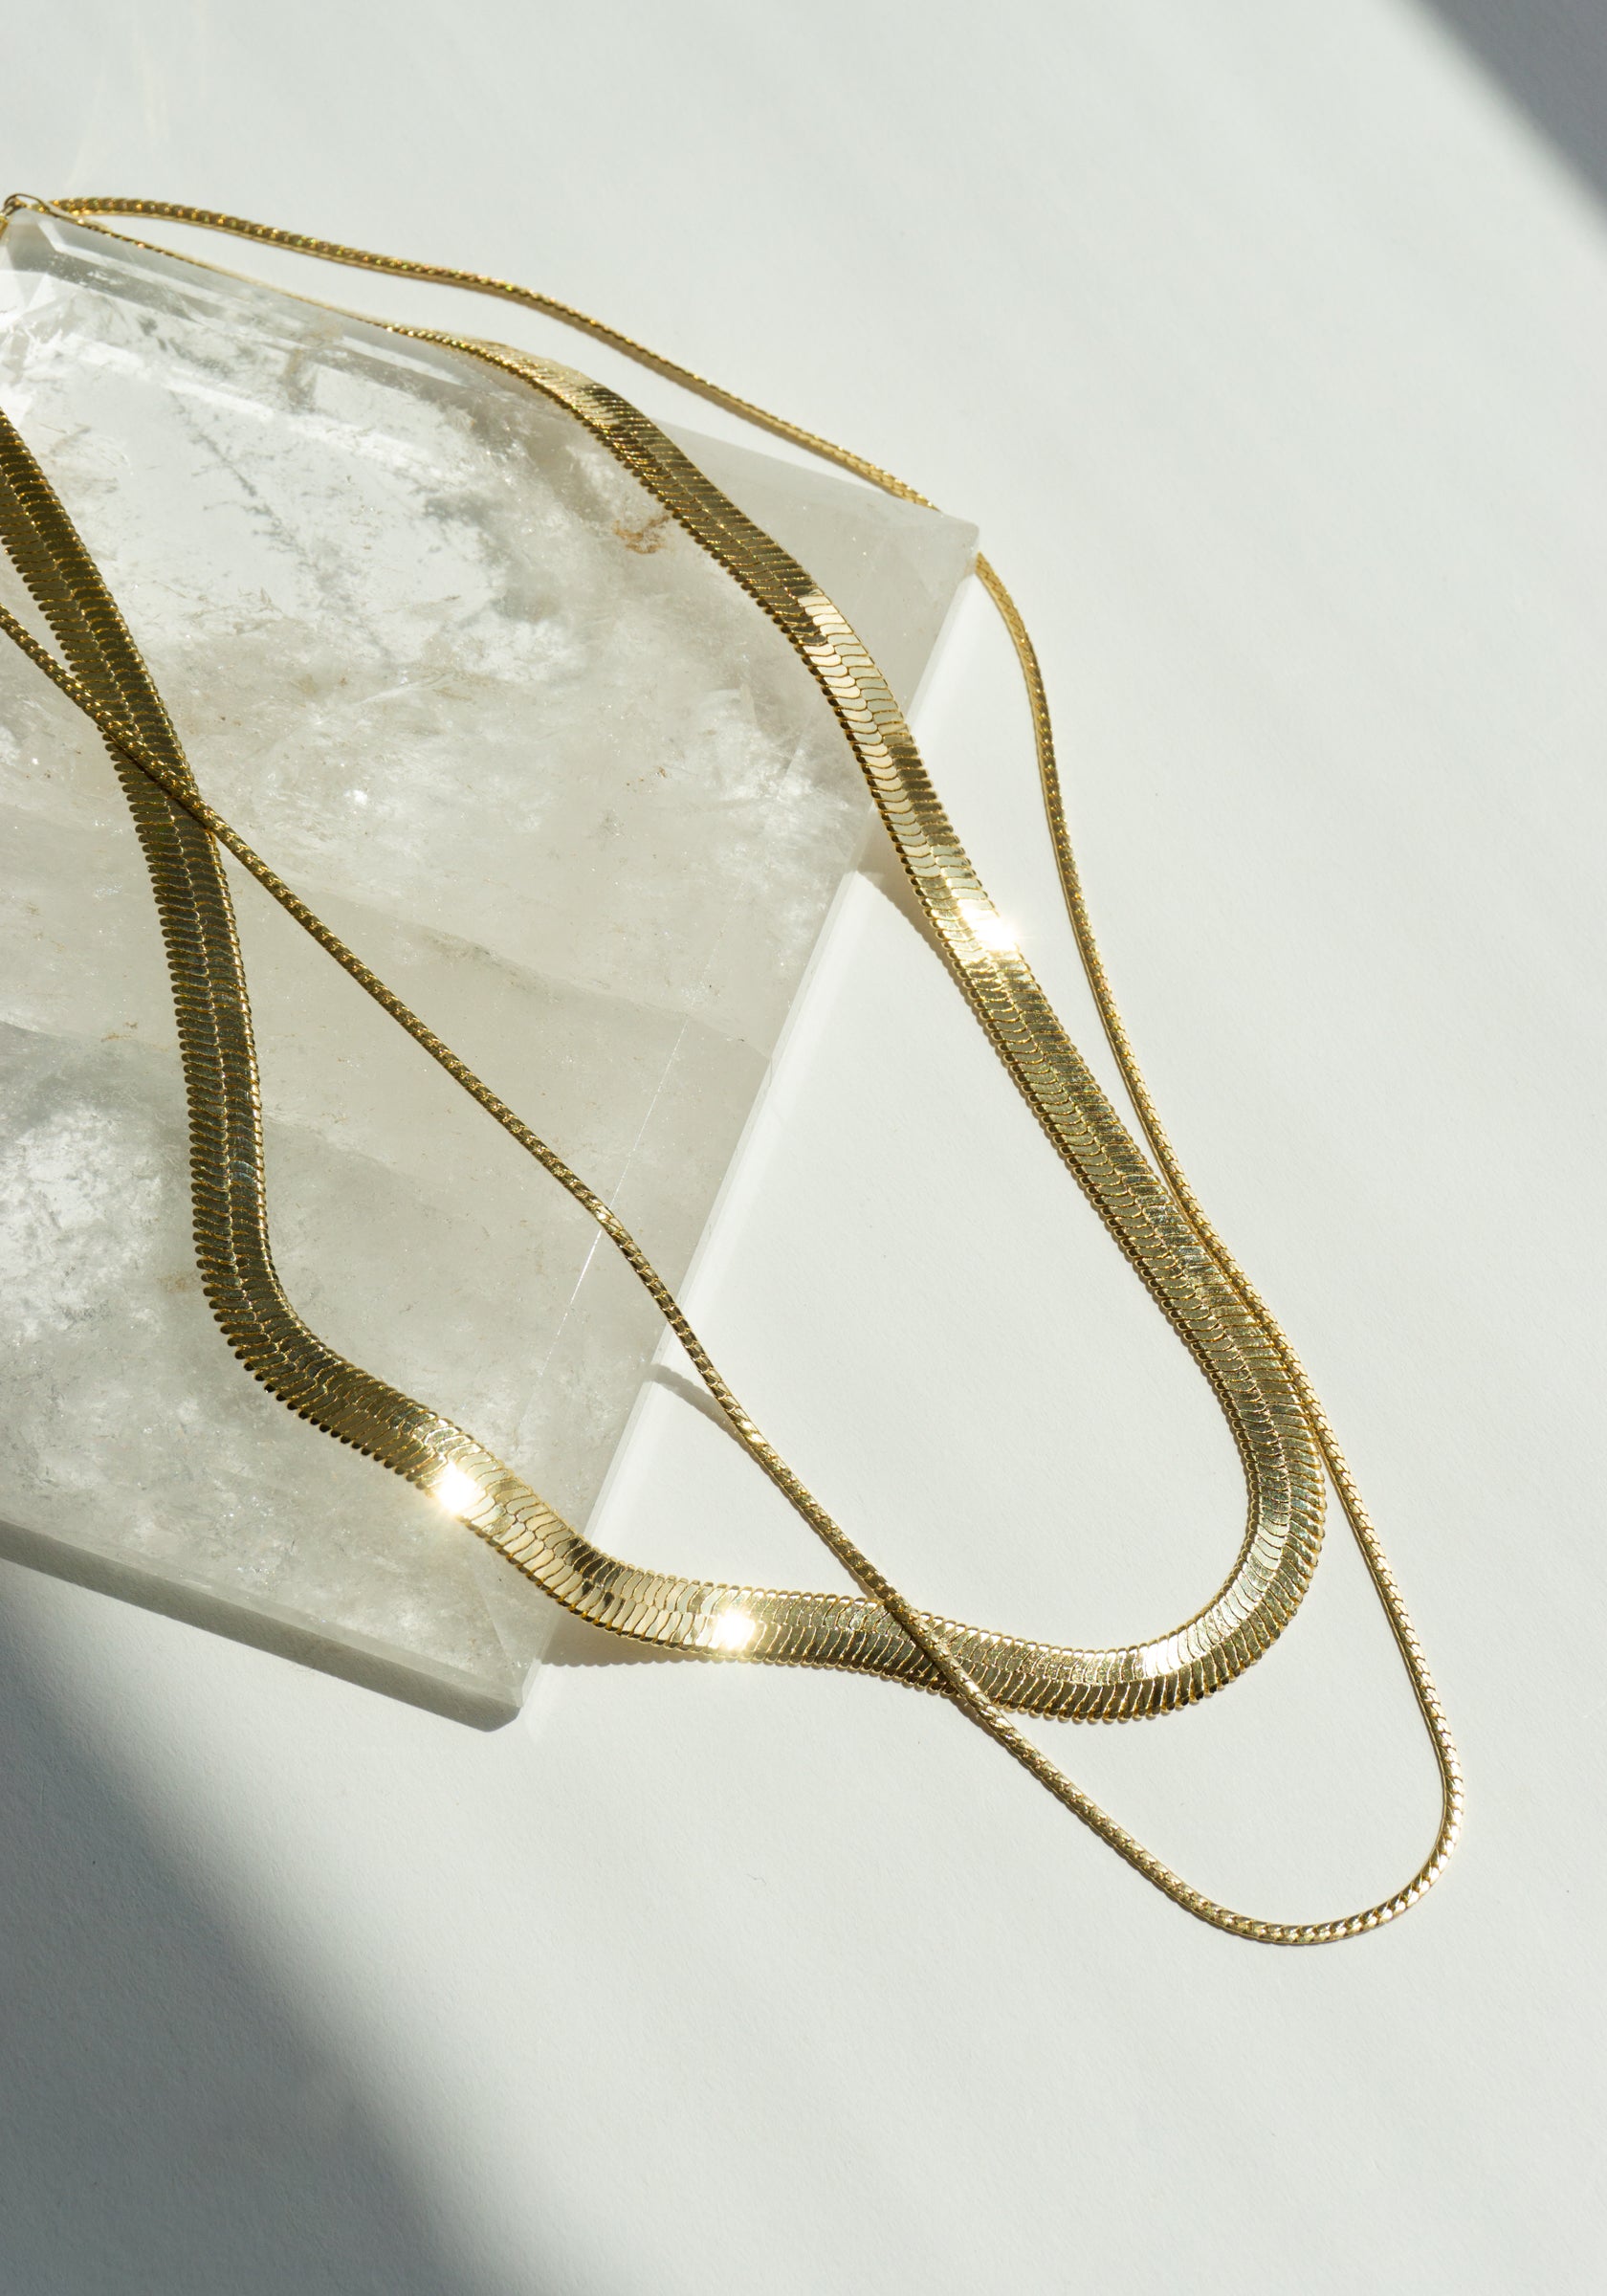 Laura Lombardi Omega Chain Necklaces